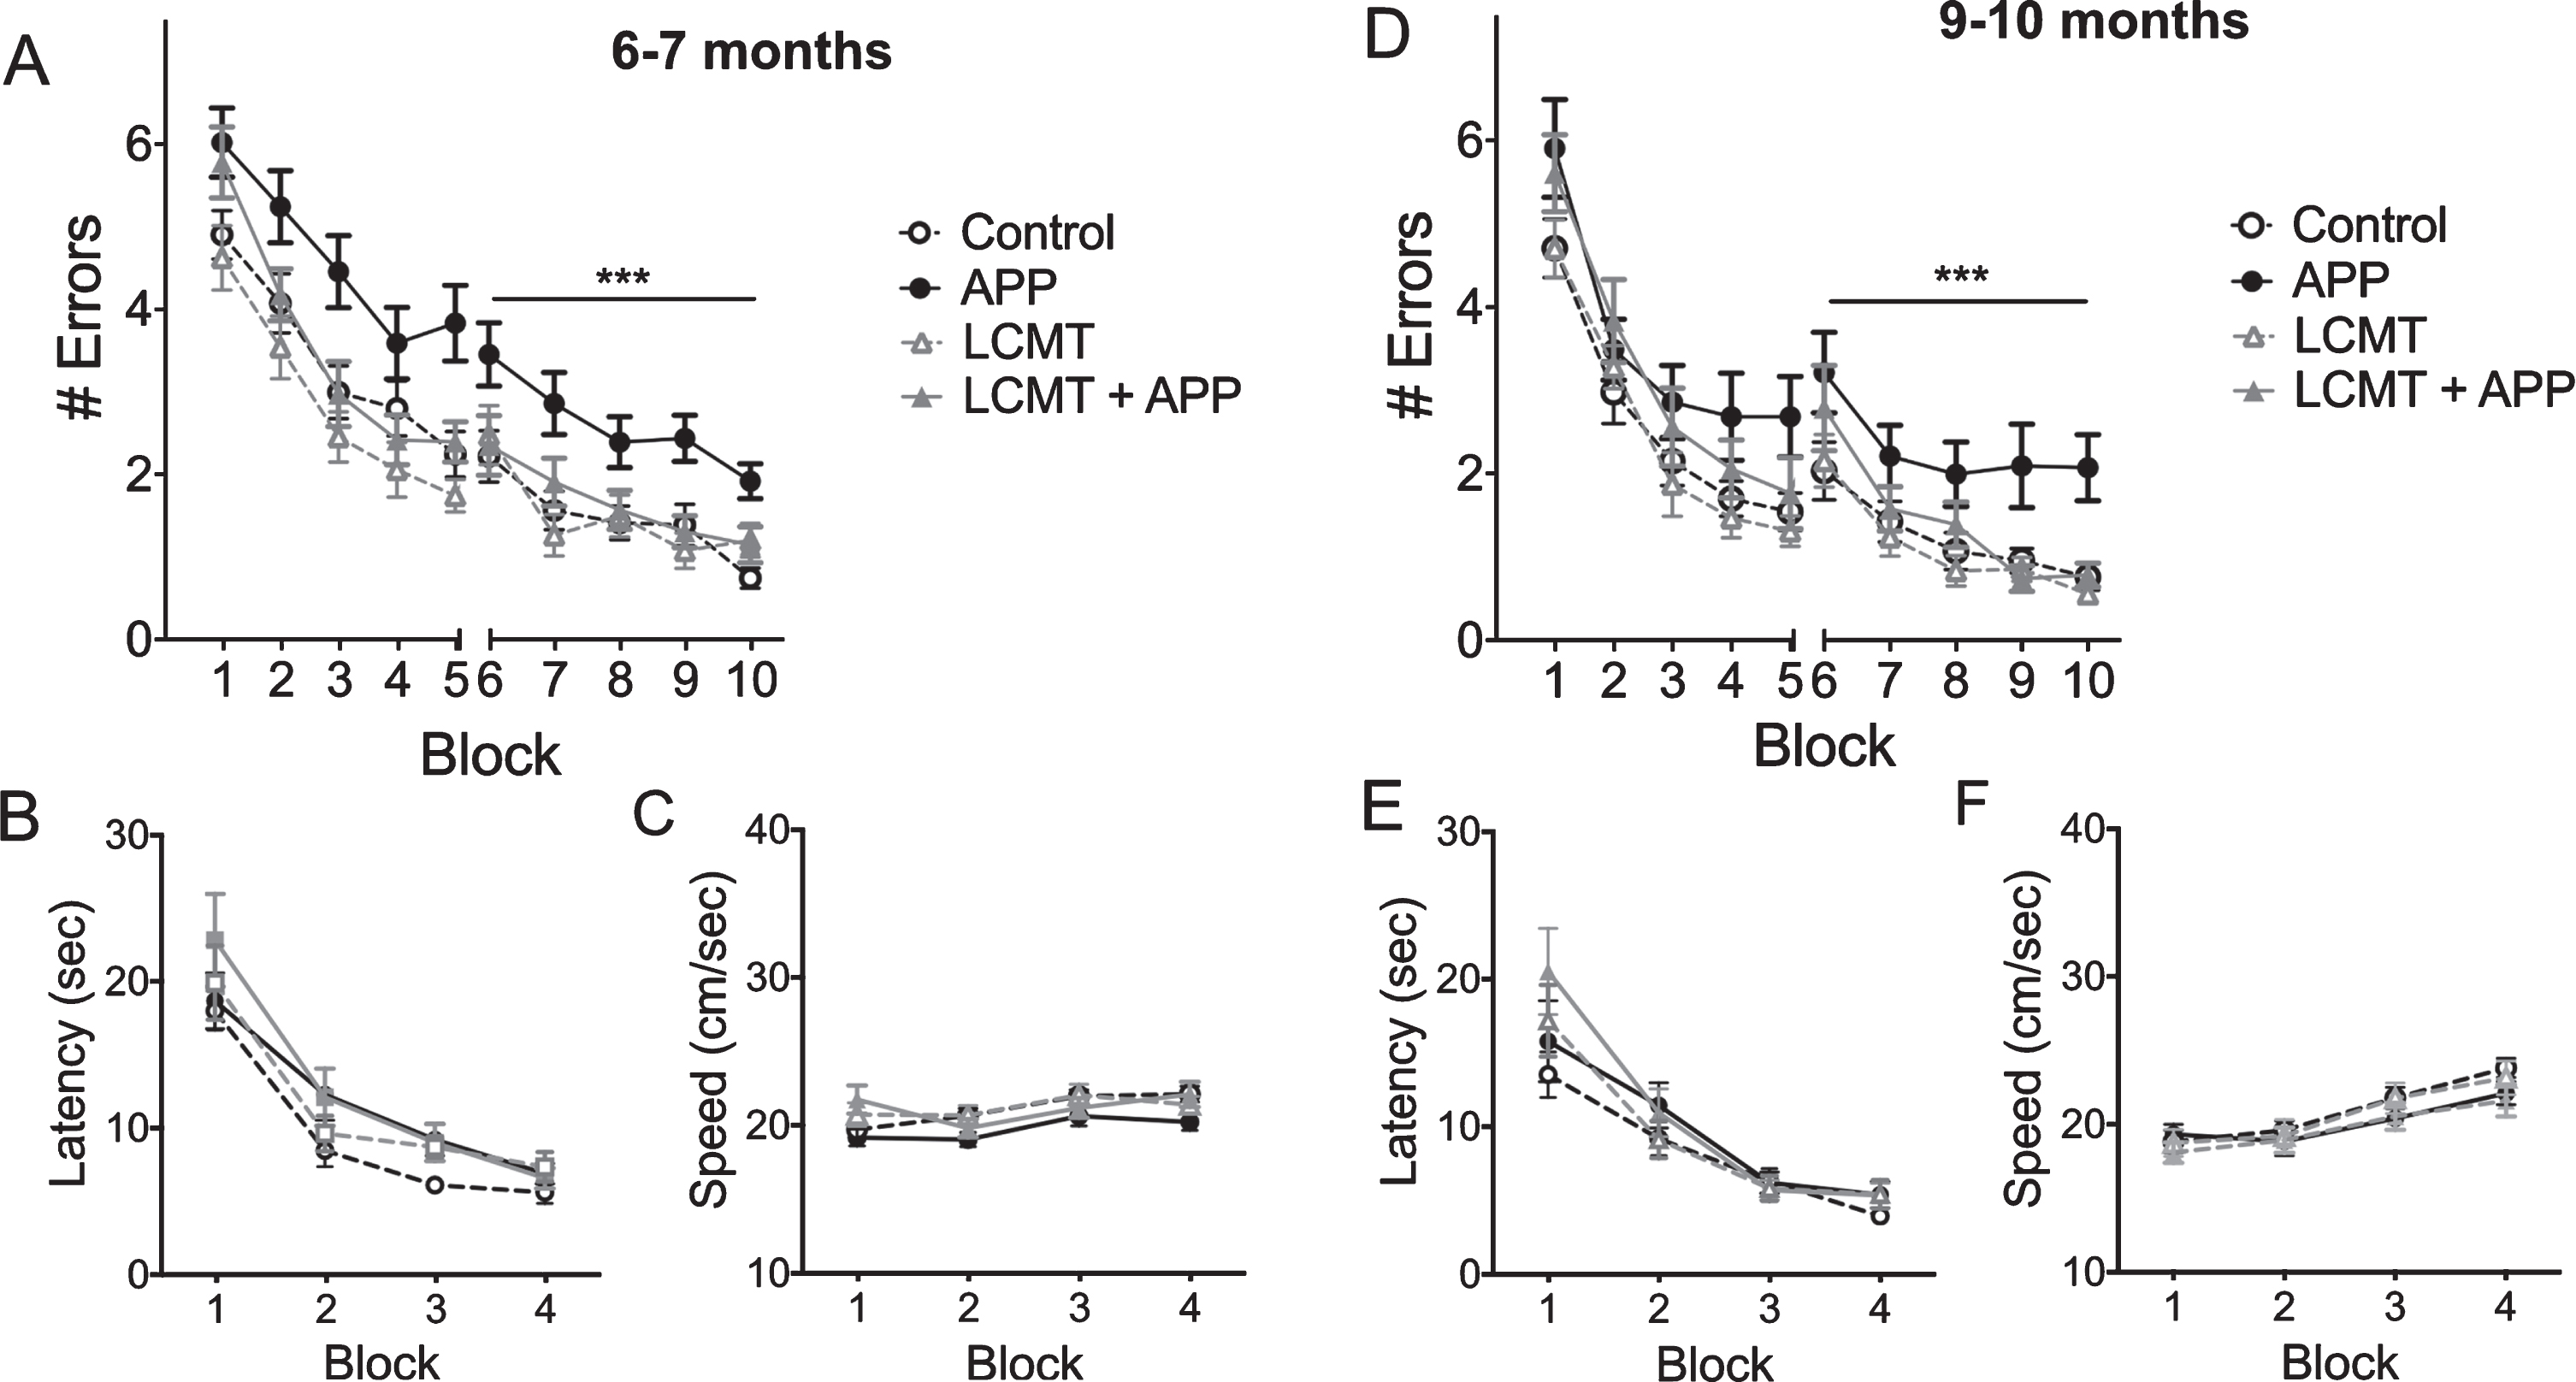 LCMT overexpression protects against cognitive impairments in Tg2576 mice. A) Plot of average number of errors committed (±SEM) during each 3-trial training block of a 2-day radial arm water maze task for 6-7-month-old mice that carried the Tg2576 APP transgene in combination with transgenic LCMT overexpression (LCMT + APP), or 6-7-month-old animals that carried the Tg2576 APP transgene alone (APP), overexpressed LCMT alone (LCMT), or controls. 2-way RM ANOVA for errors on day 2 (blocks 6–10) with group and block as factors shows a significant effect of group (F(3,76) = 9.456, p < 0.0001). Dunnett’s multiple comparisons show that the APP group was significantly different from each of the other three groups (p = 0.0025 for LCMT + APP, p = 0.0003 for LCMT, and p < 0.0001 for control). B) Plot of the average escape latency (±SEM) for 6-7-month-old animals from the indicated groups during training on a visible platform water maze task showed no significant differences between groups (2-way RM ANOVA for effect of group with group and block as factors F(3, 76) = 2.202, p = 0.0947). C) Plot of the average swim speed (±SEM) for the indicated groups during training on the visible platform water maze task described in B showed a significant difference between groups overall (2-way RM ANOVA for effect of group with group and block as factors F(3, 76) = 2.948, p = 0.0381), but no significant differences in pairwise comparisons (Tukey’s comparisons p > 0.05 for all). D) Plot of average number of errors committed (±SEM) during each 3-trial training block of a 2-day radial arm water maze task for 9-10-month-old mice that carried the Tg2576 APP transgene in combination with transgenic LCMT overexpression (LCMT + APP), or 9-10-month-old animals that carried the Tg2576 APP transgene alone (APP), overexpressed LCMT alone (LCMT), or controls. 2-way RM ANOVA for errors on day 2 (blocks 6–10) with group and block as factors shows a significant effect of group (F(3, 65) = 6.135, p = 0.0010). Dunnett’s multiple comparisons show that the APP group was significantly different from each of the other three groups (p = 0.0220 for LCMT + APP, p = 0.0006 for LCMT and p = 0.0029 for control). E) Plot of the average escape latency (±SEM) for 9-10-month-old animals from the indicated groups during training on a visible platform water maze task reveals no significant differences between groups (2-way RM ANOVA for latency with group and block as factors shows no significant effect of group F(3, 64) = 0.961, p = 0.4167). F) Plot of the average swim speed (±SEM) for the indicated groups during training on the visible platform water maze task described in B reveals no significant differences between groups (2-way RM ANOVA for speed with group and block as factors shows no significant effect of group F(3, 64) = 0.5046, p = 0.6805). For experiments on 6-7-month-old animals: N = 27 control, 22 APP, 16 LCMT, 15 LCMT + APP. For experiments on 9-10-month-old animals: N = 17 control, 17 APP, 19 LCMT, 16 LCMT + APP.